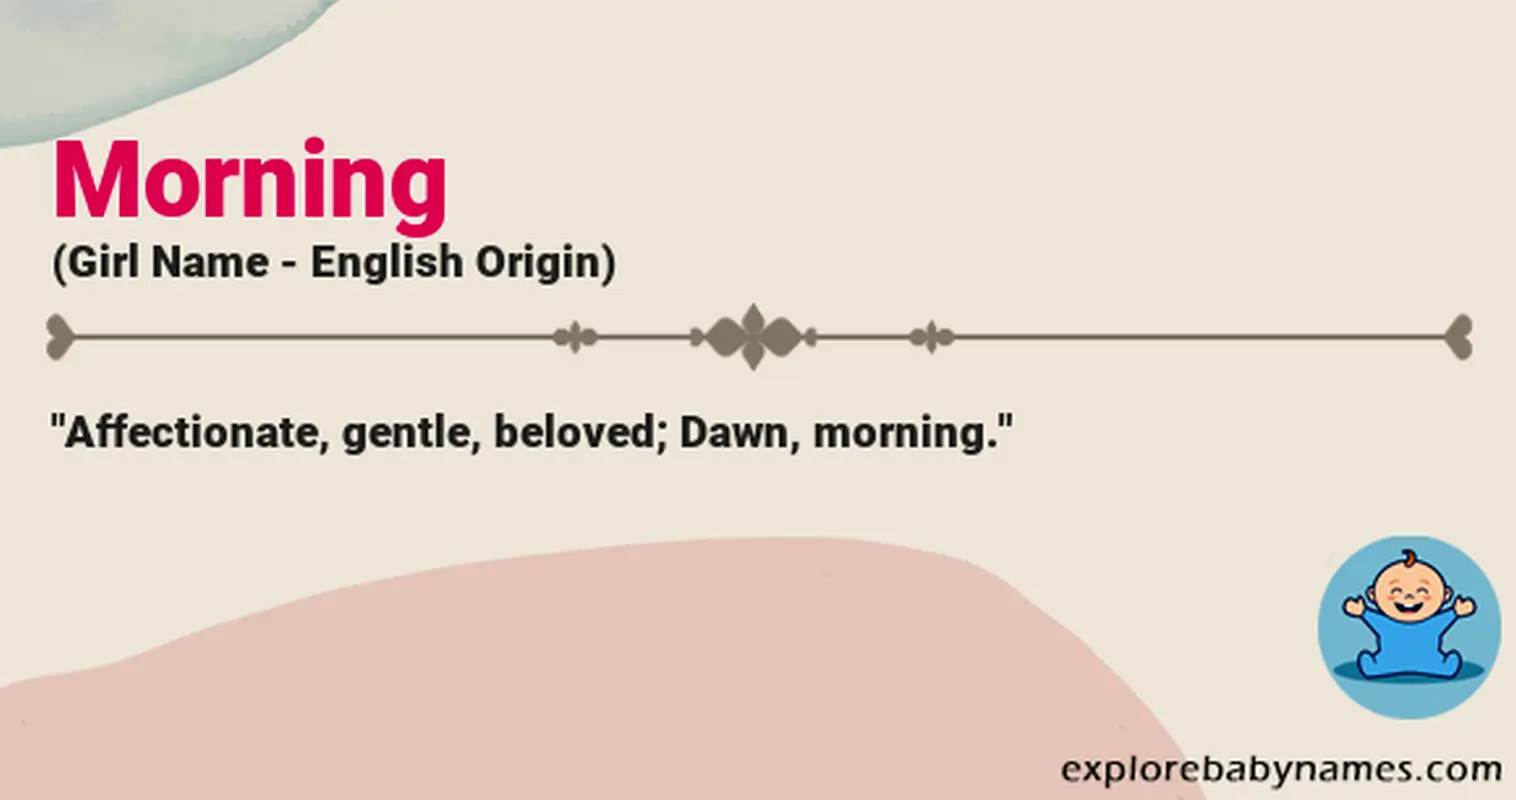 Meaning of Morning